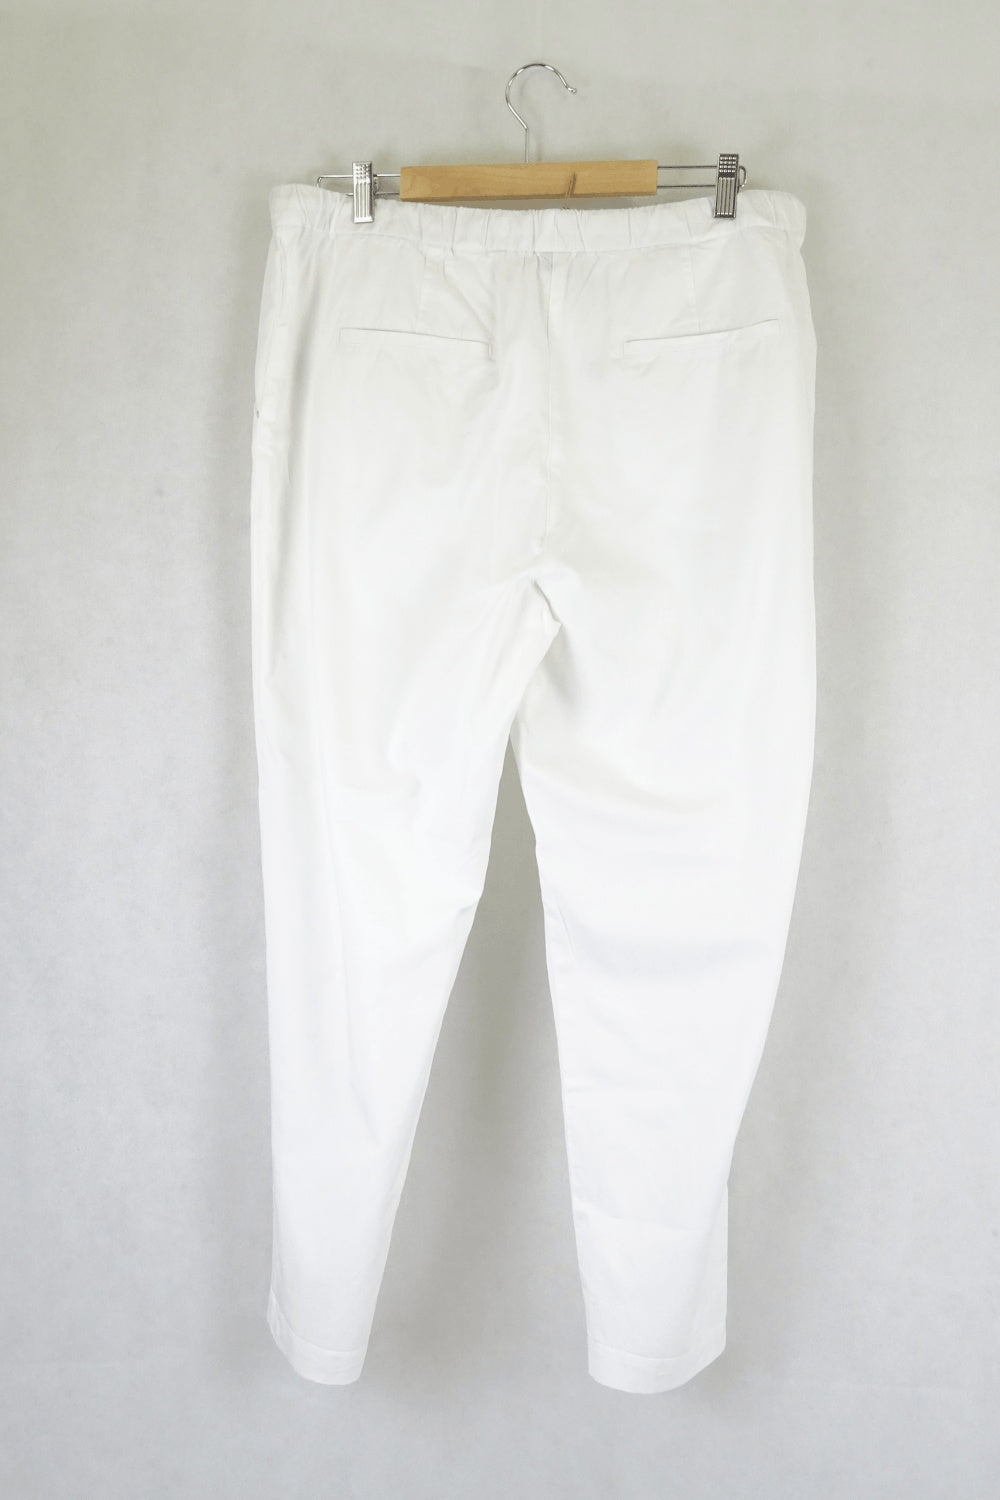 Sussan White Pants 14